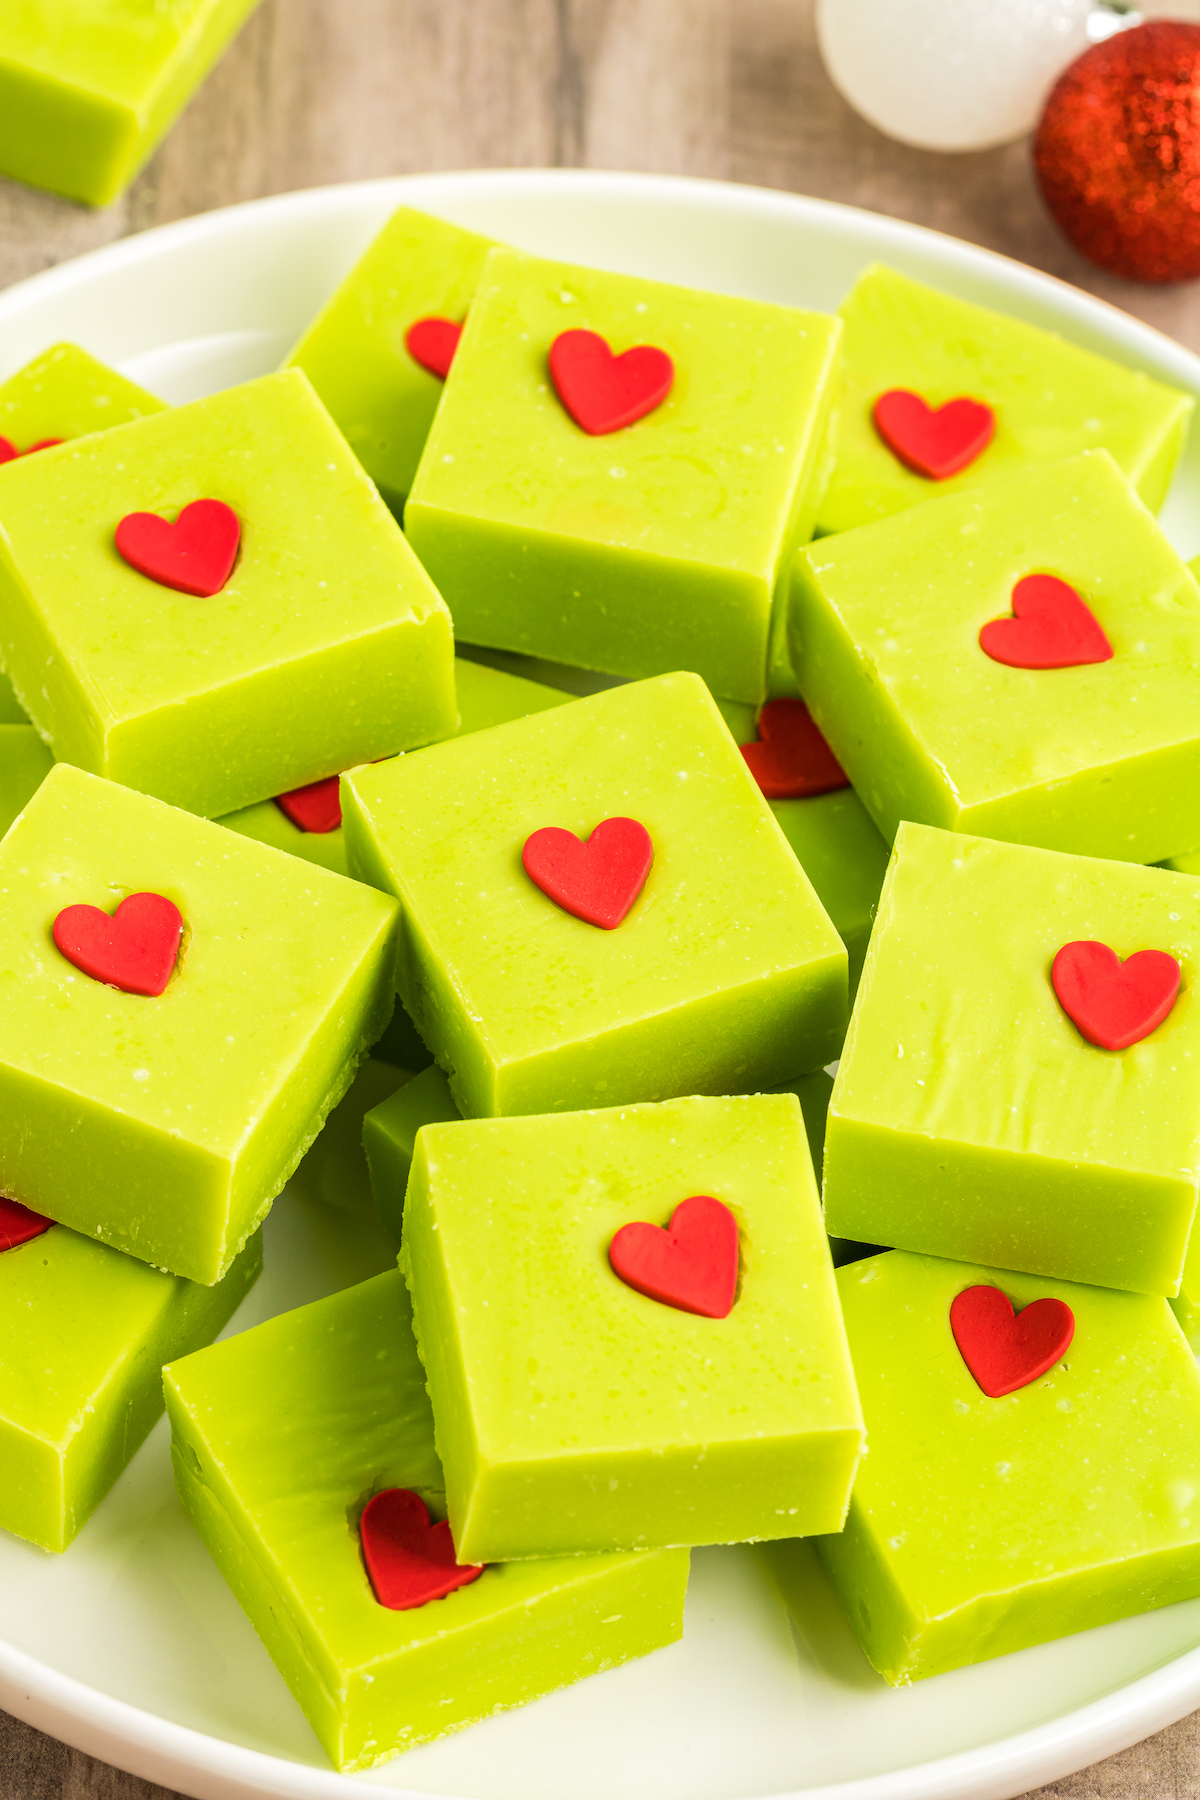 Squares of Grinch candy with red hearts.